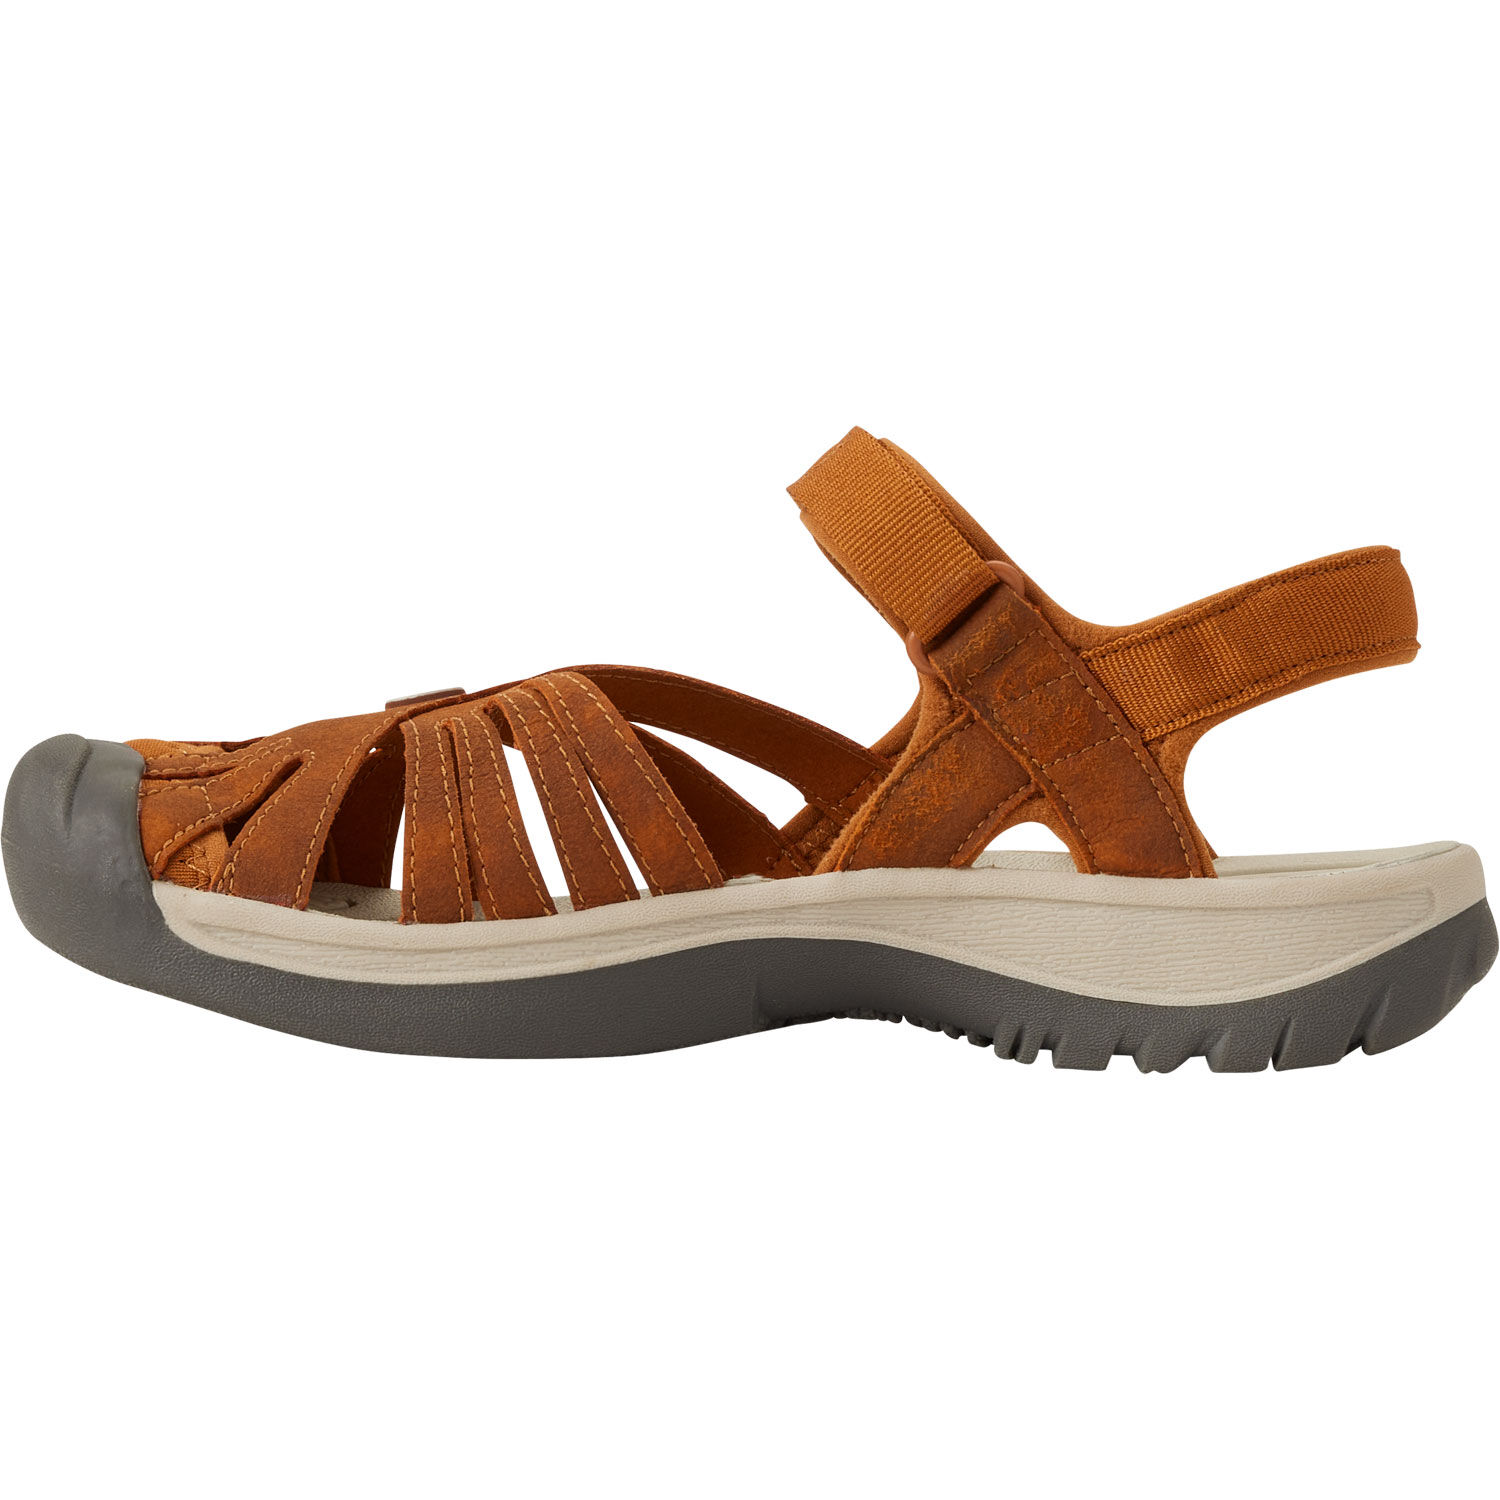 The @keen Rose sandal provides comfort where your feet need it most. The  grippy sole enhances control and stability! #keen #summershoes #sandals |  SnapWidget